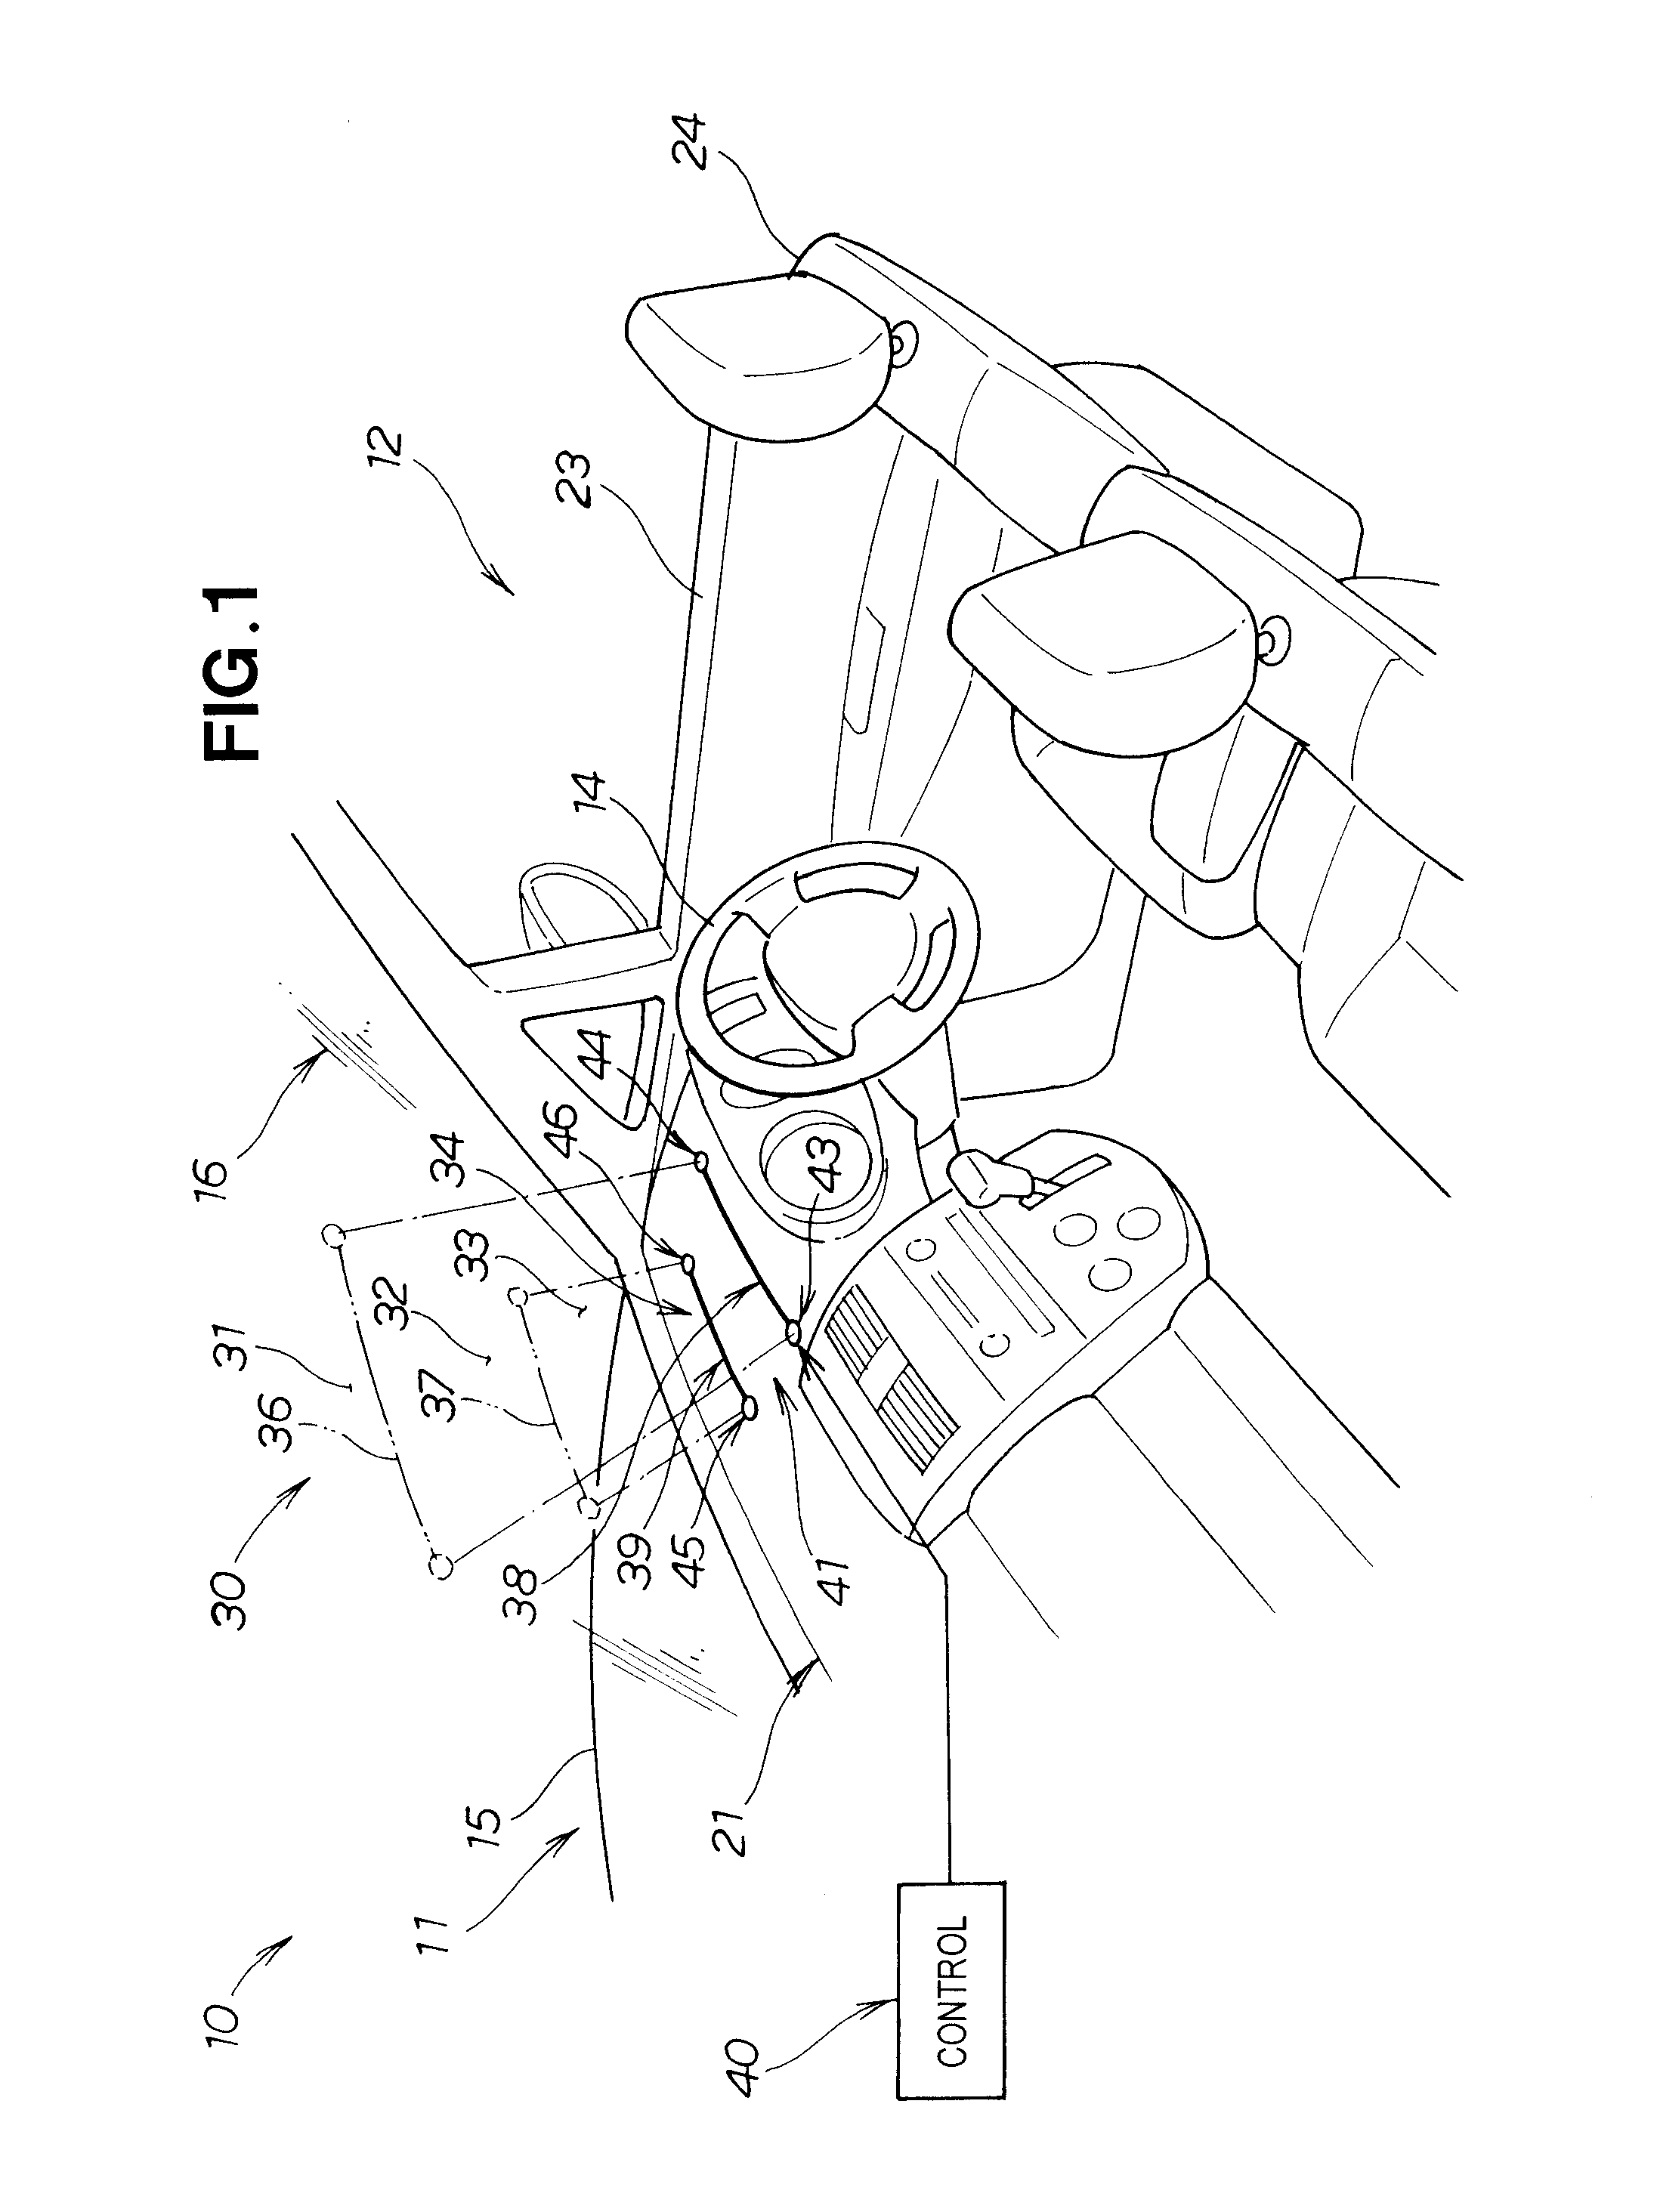 Vision enhancement device for use in vehicle